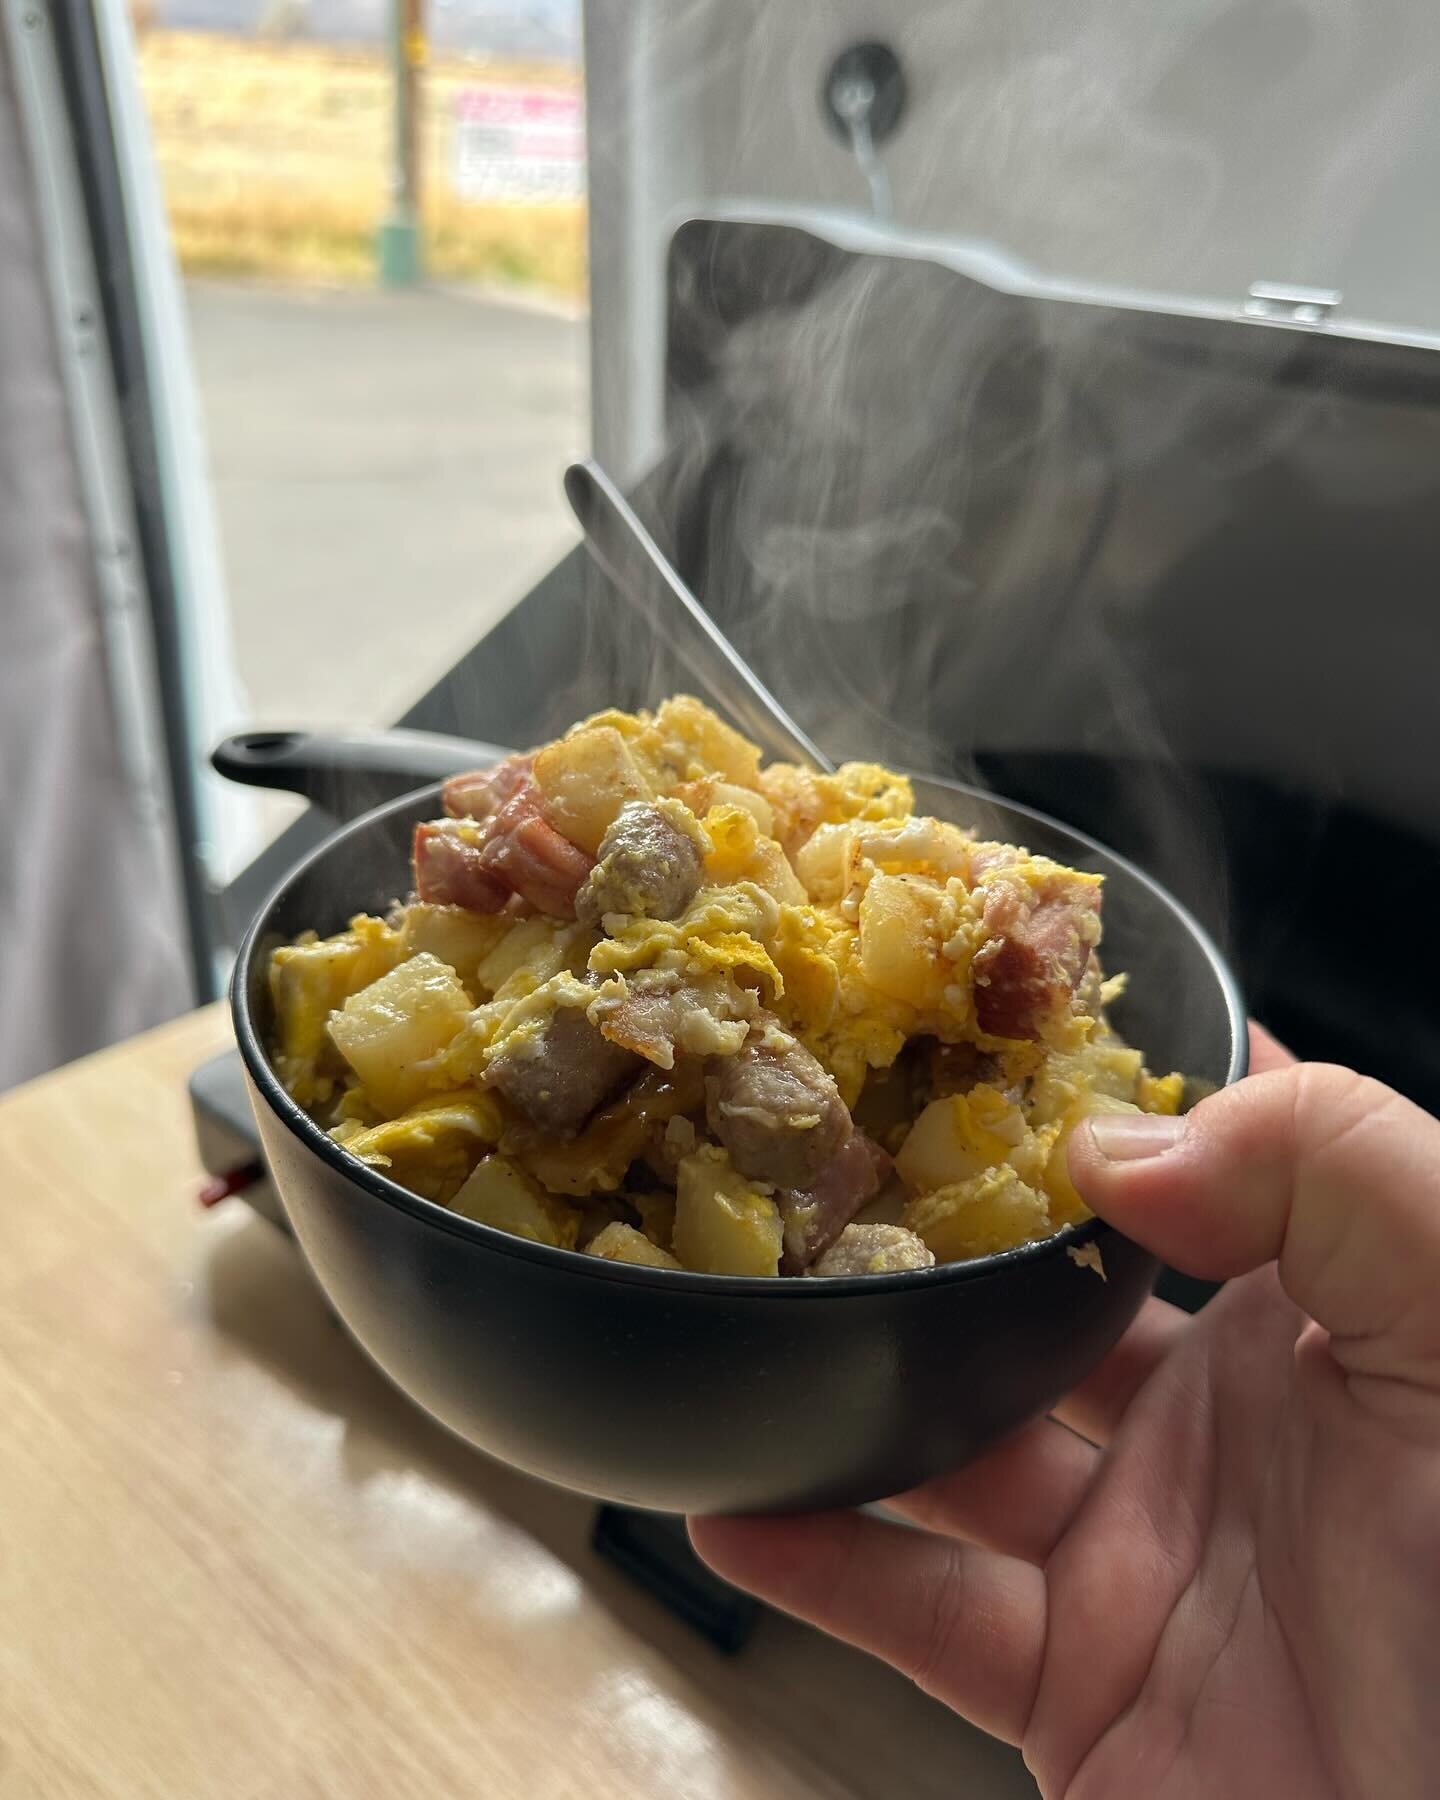 When you want breakfast for lunch and you have a kitchen &lsquo;cause you drive your home to work. Fresh farm raised eggs too. 

#vanlife #breakfastforlunch #eggscramble #delicious #promastercampervan #promasterconversion